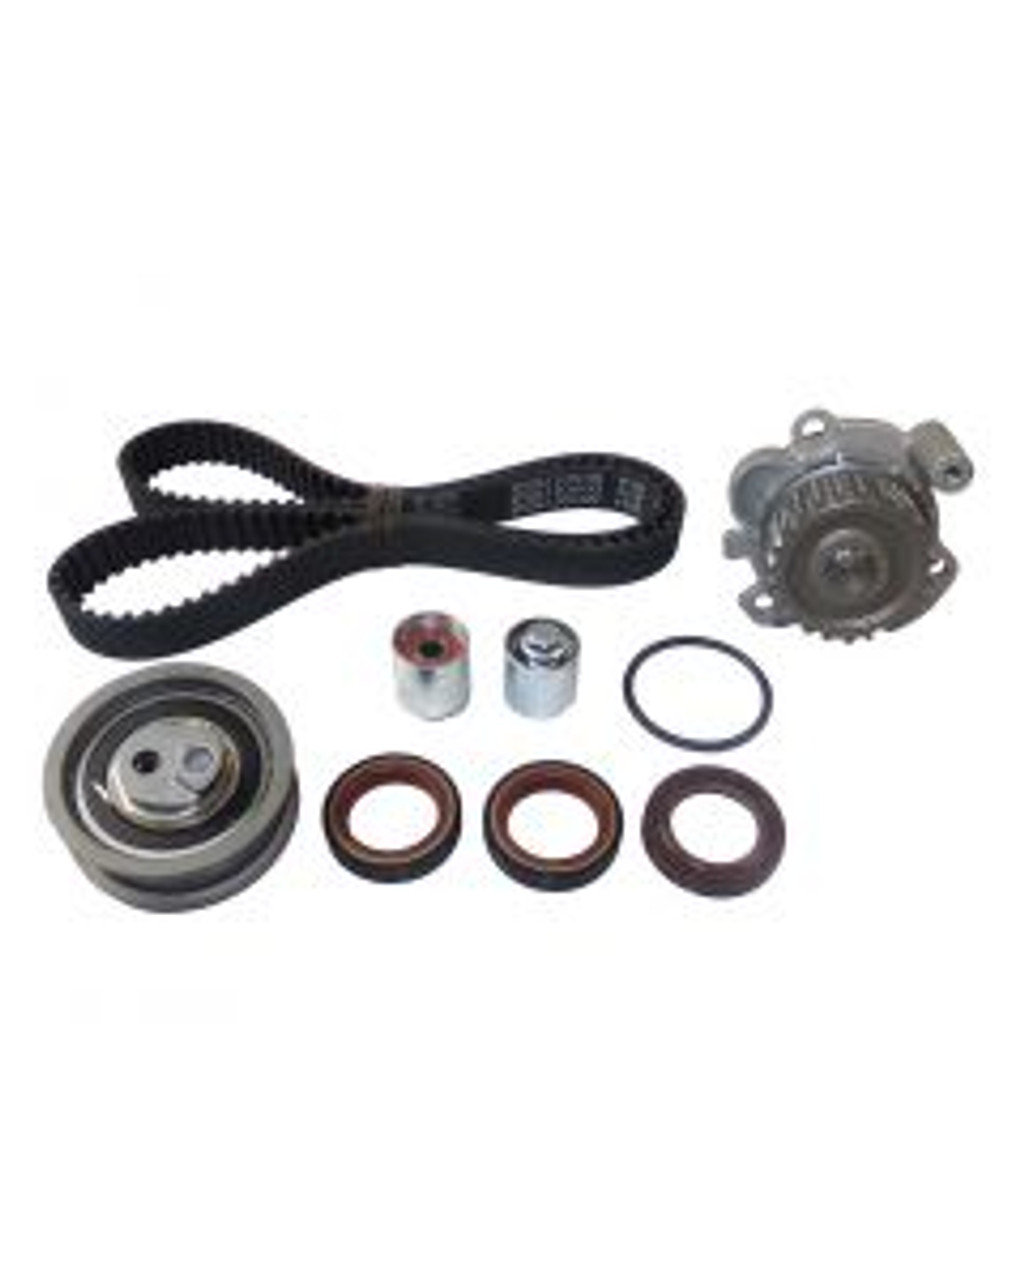 Timing Belt Kit with Water Pump 2.0L 2007 Volkswagen GTI - TBK802WP.29